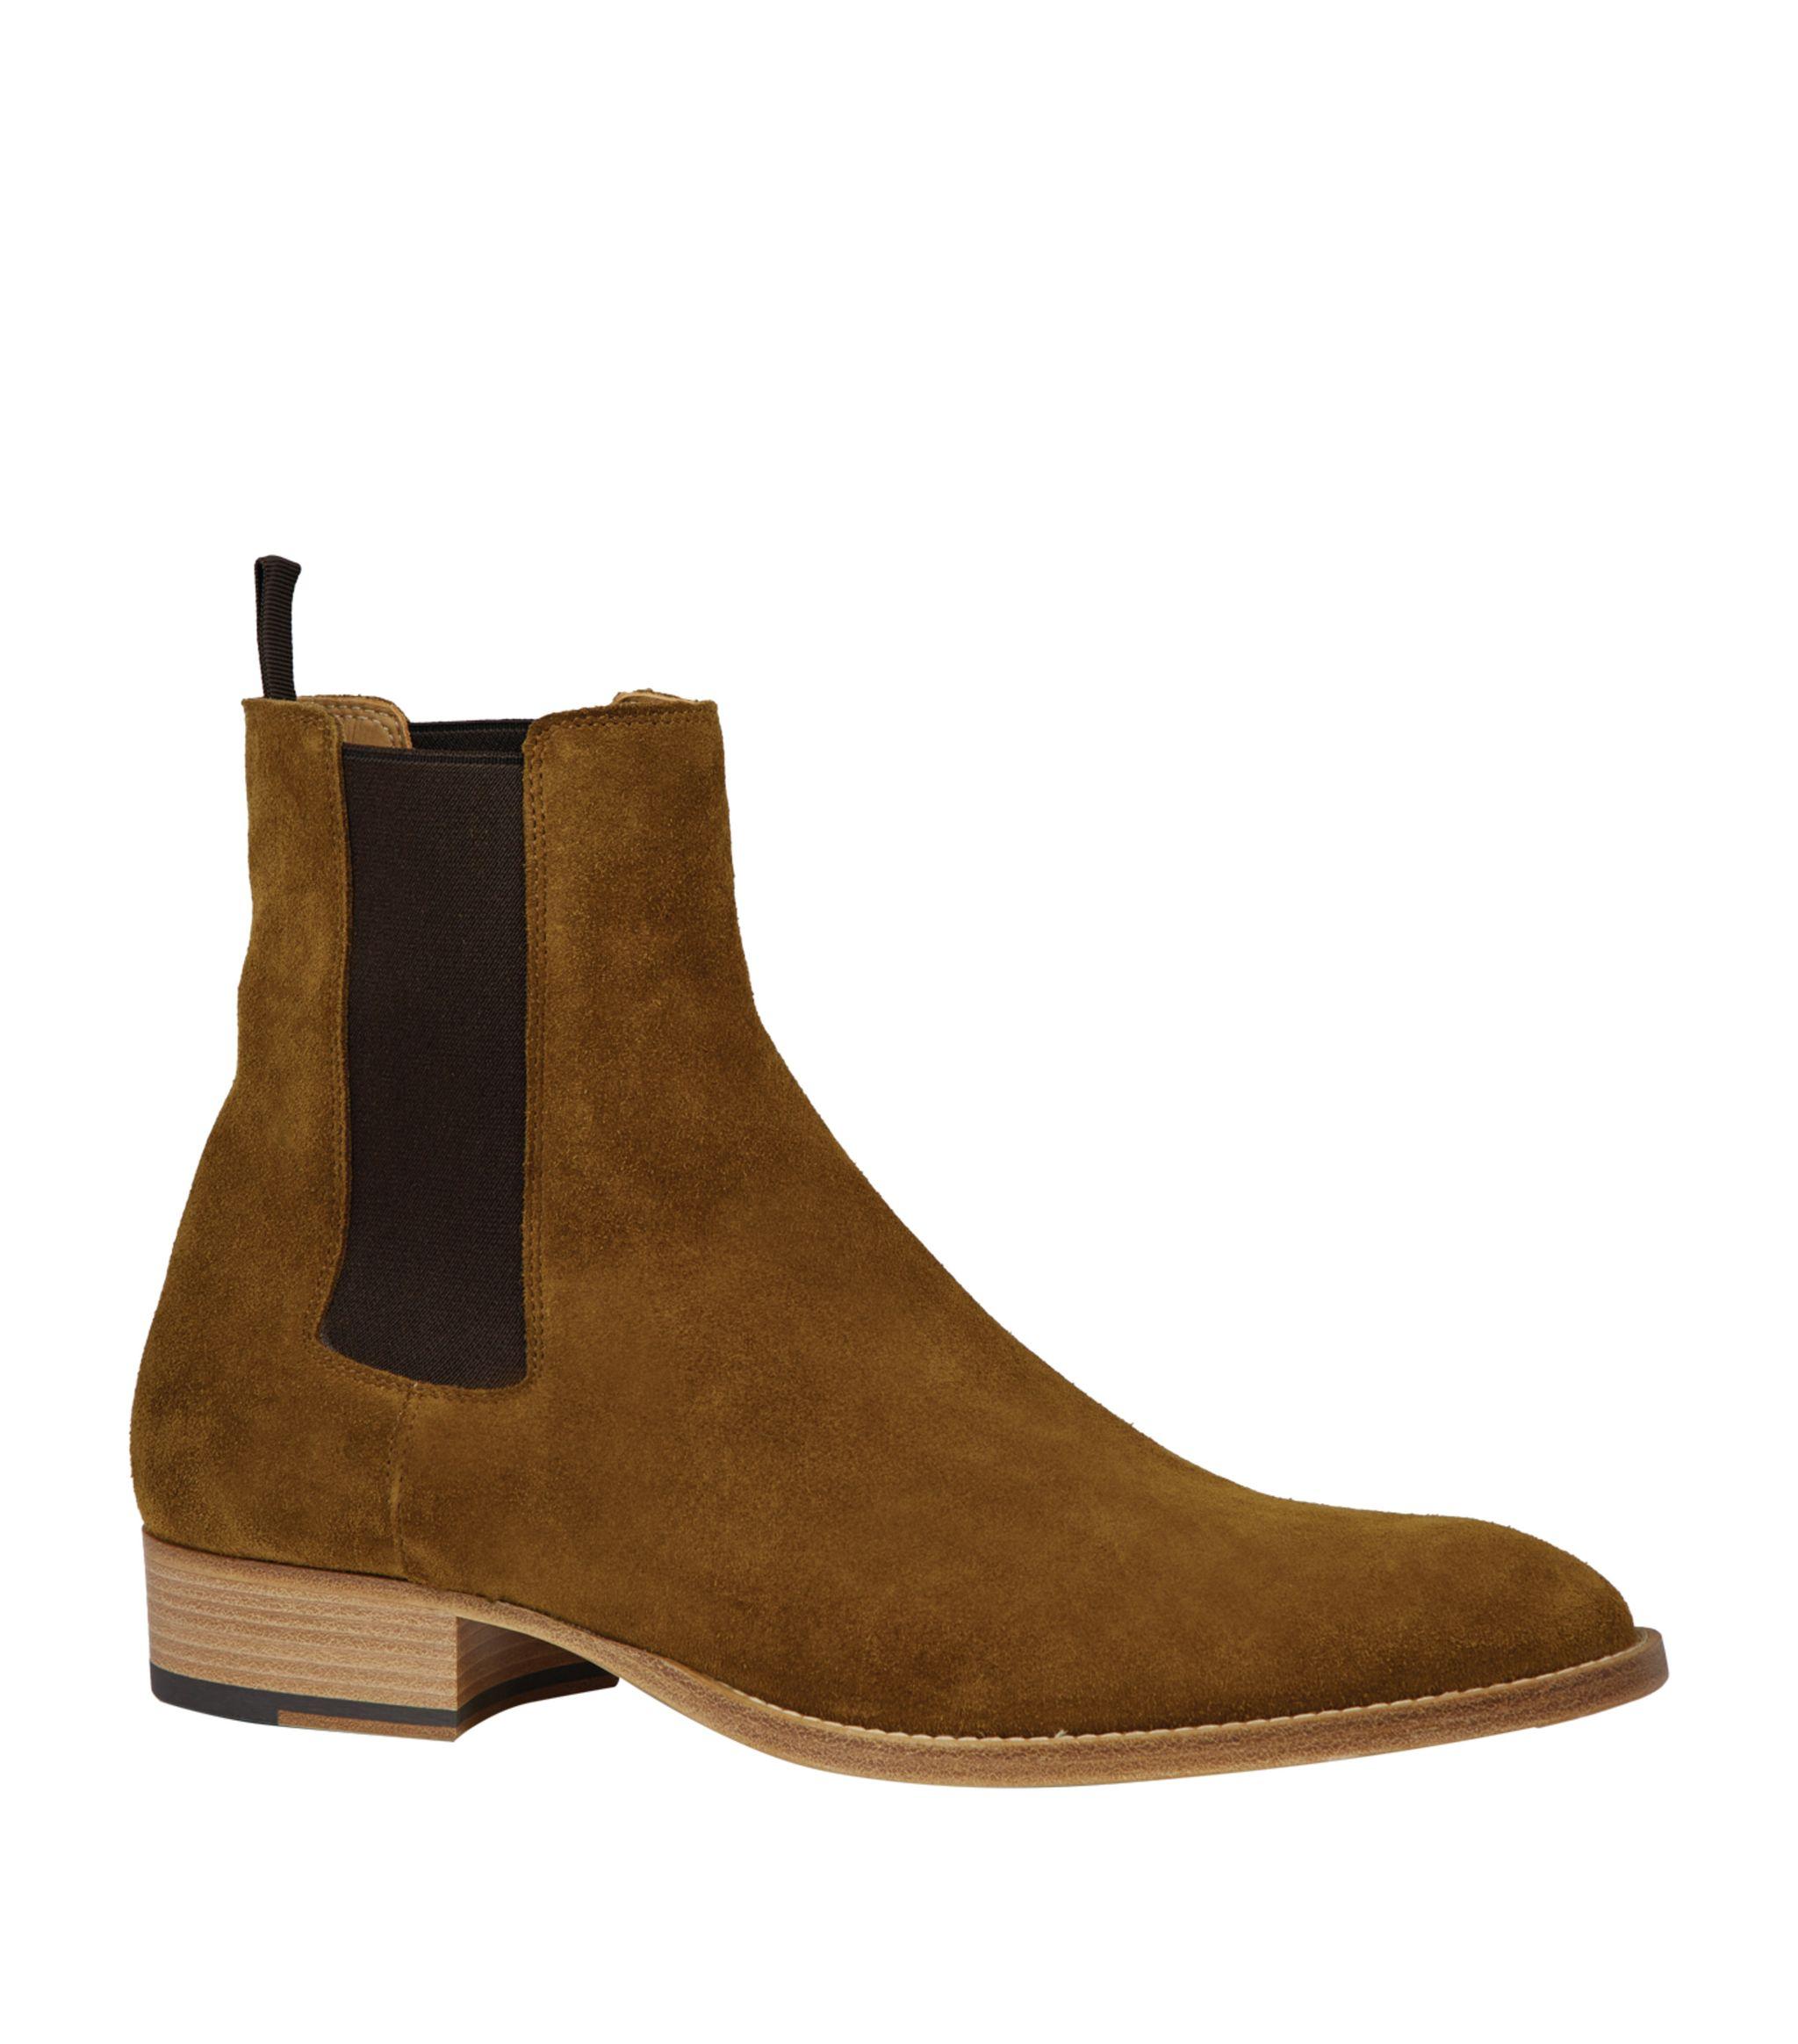 Sandro Suede Chelsea Boots in Caramel (Brown) for Men - Save 44% - Lyst